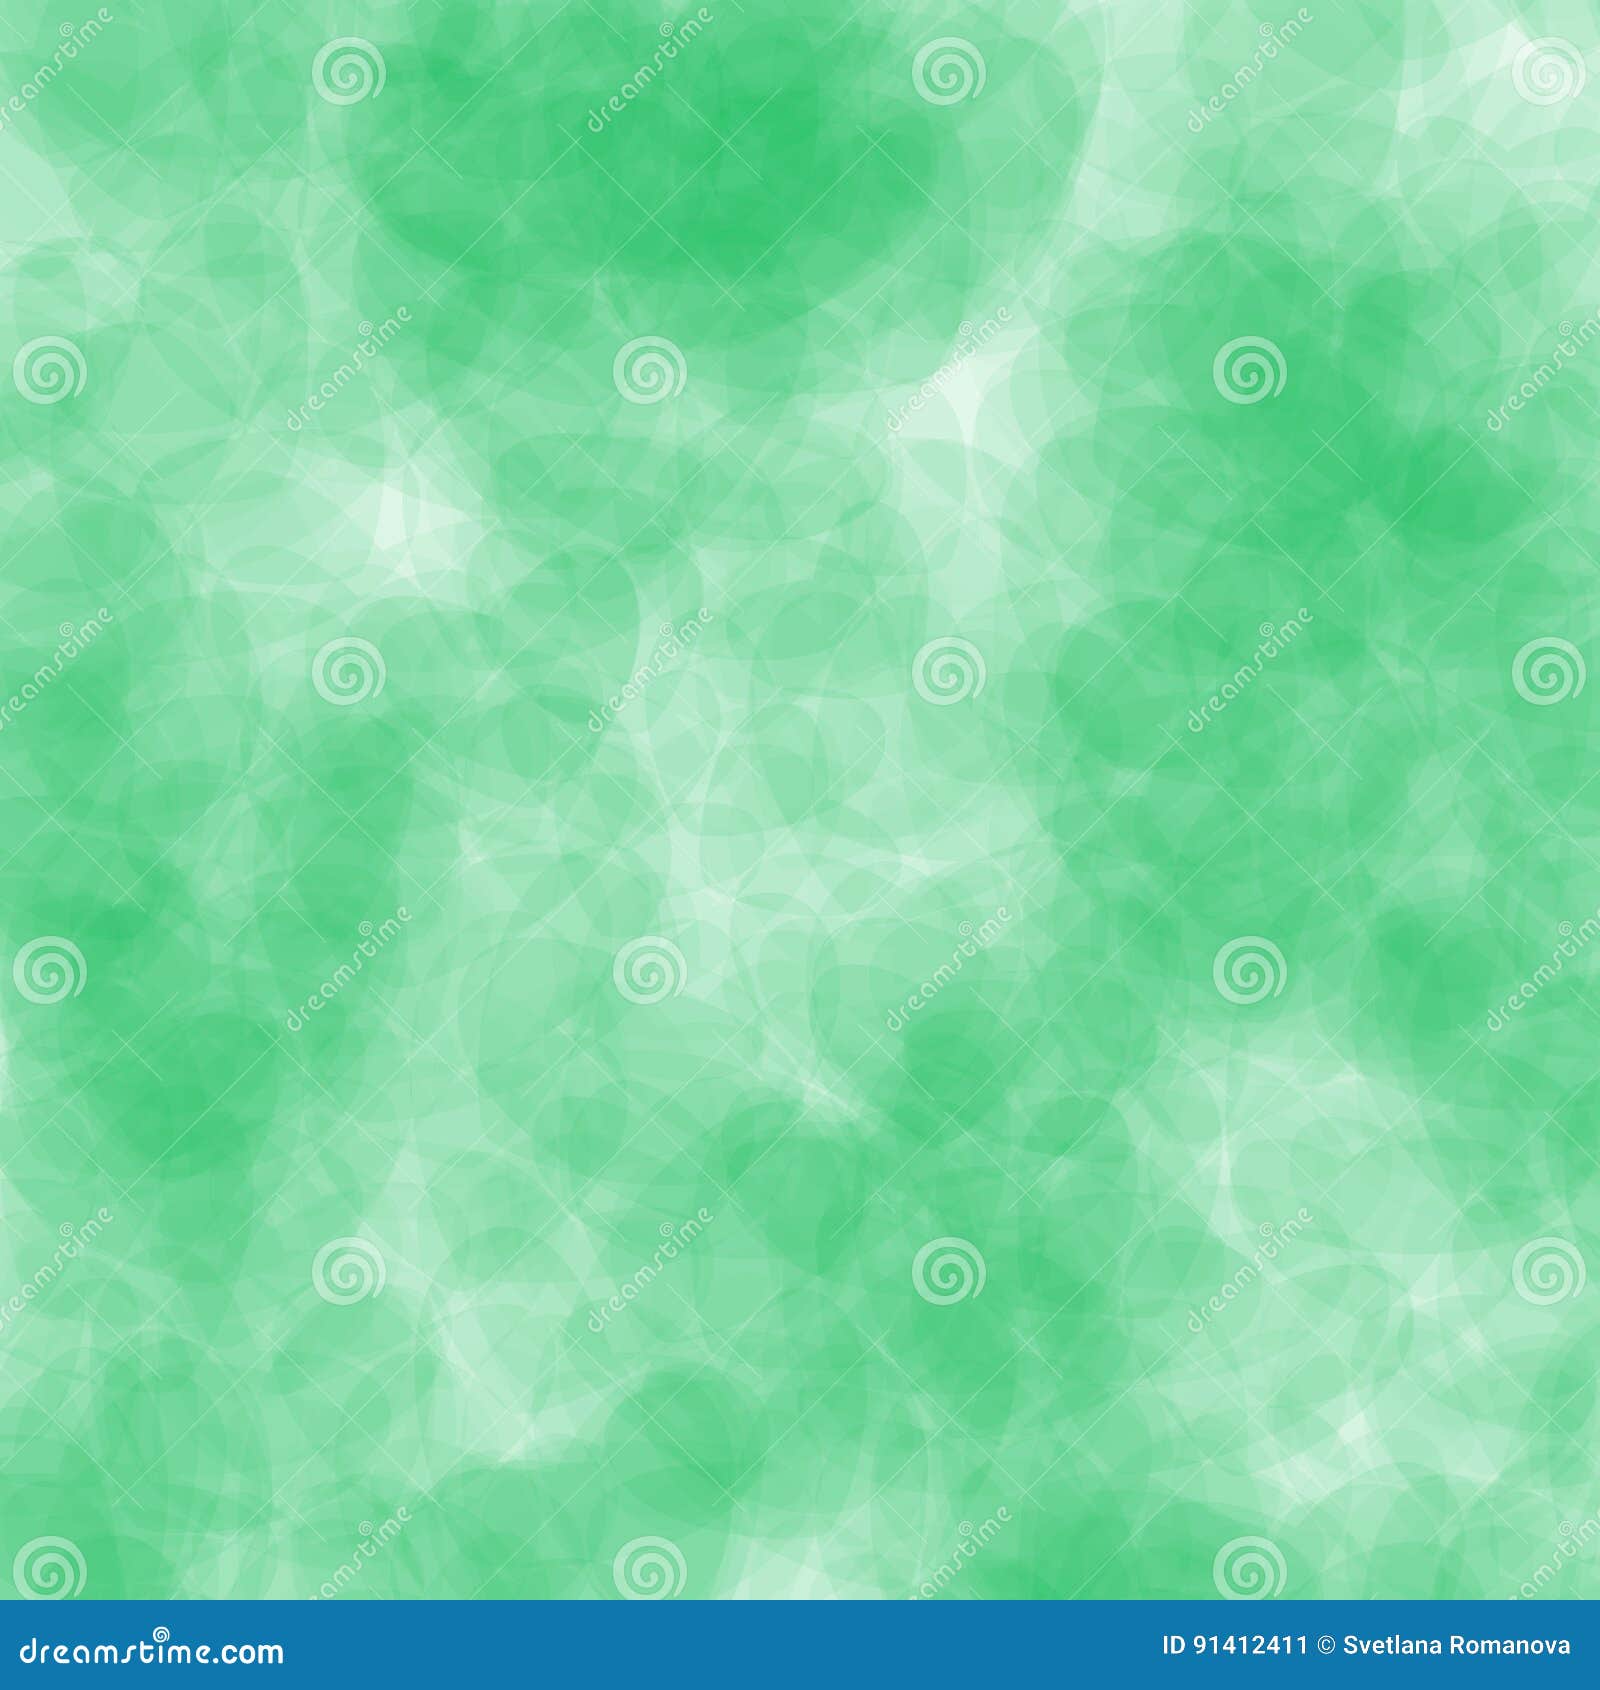 Green pastel background stock vector. Illustration of passion - 91412411